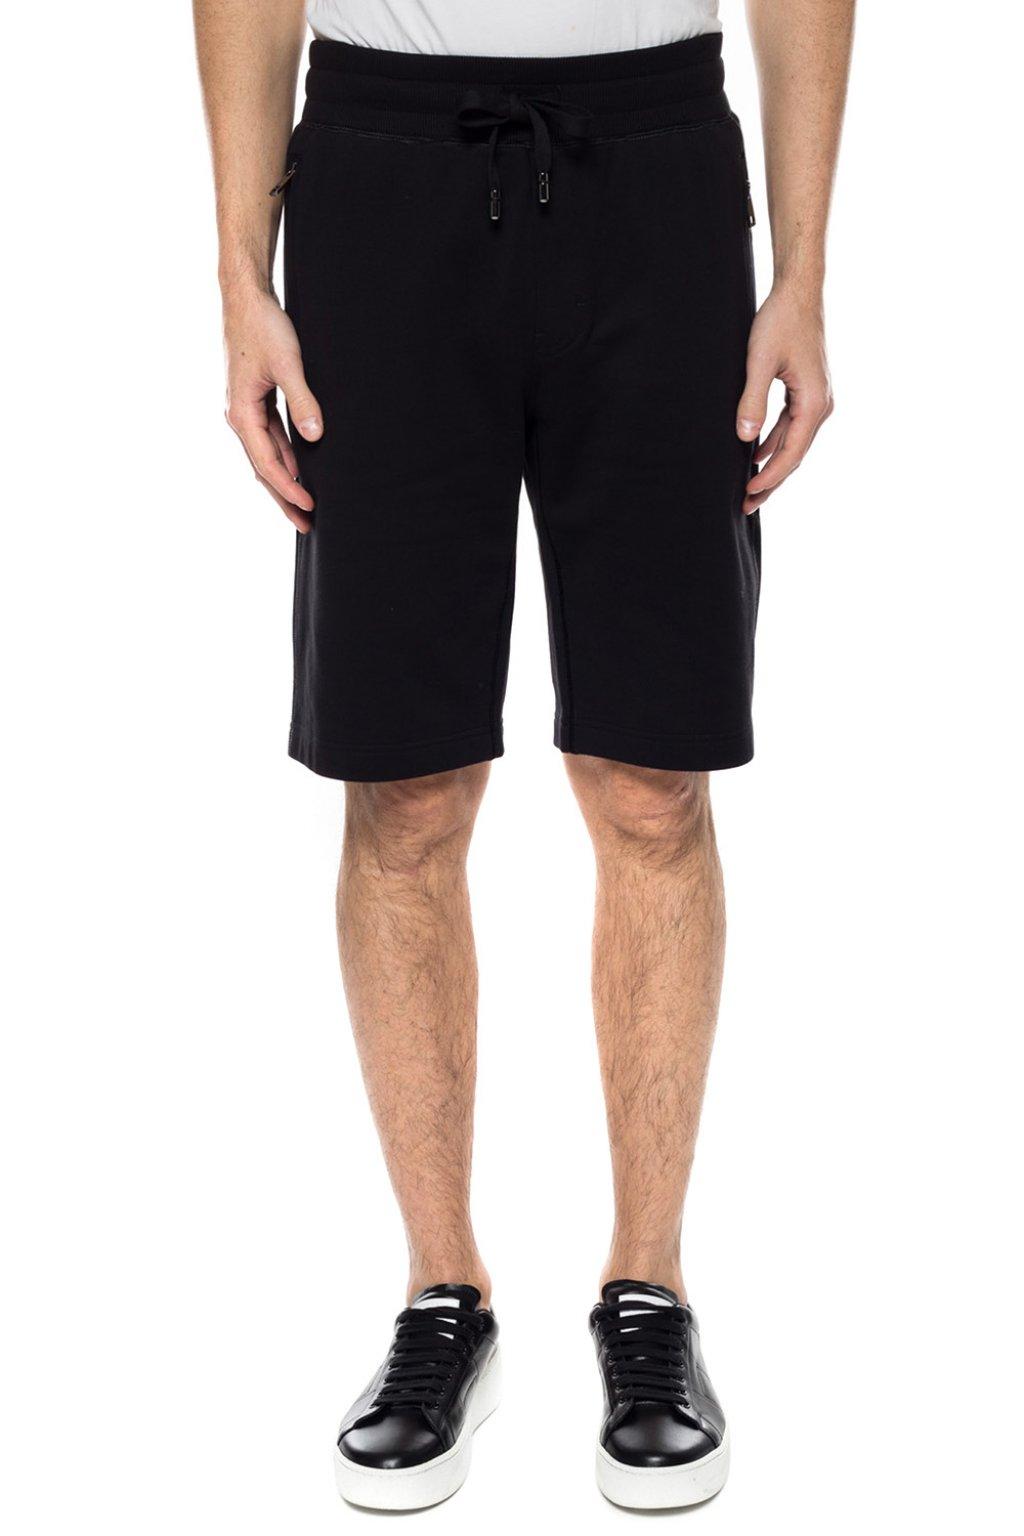 Dolce & Gabbana Loopback Cotton-jersey Shorts in Black for Men - Save